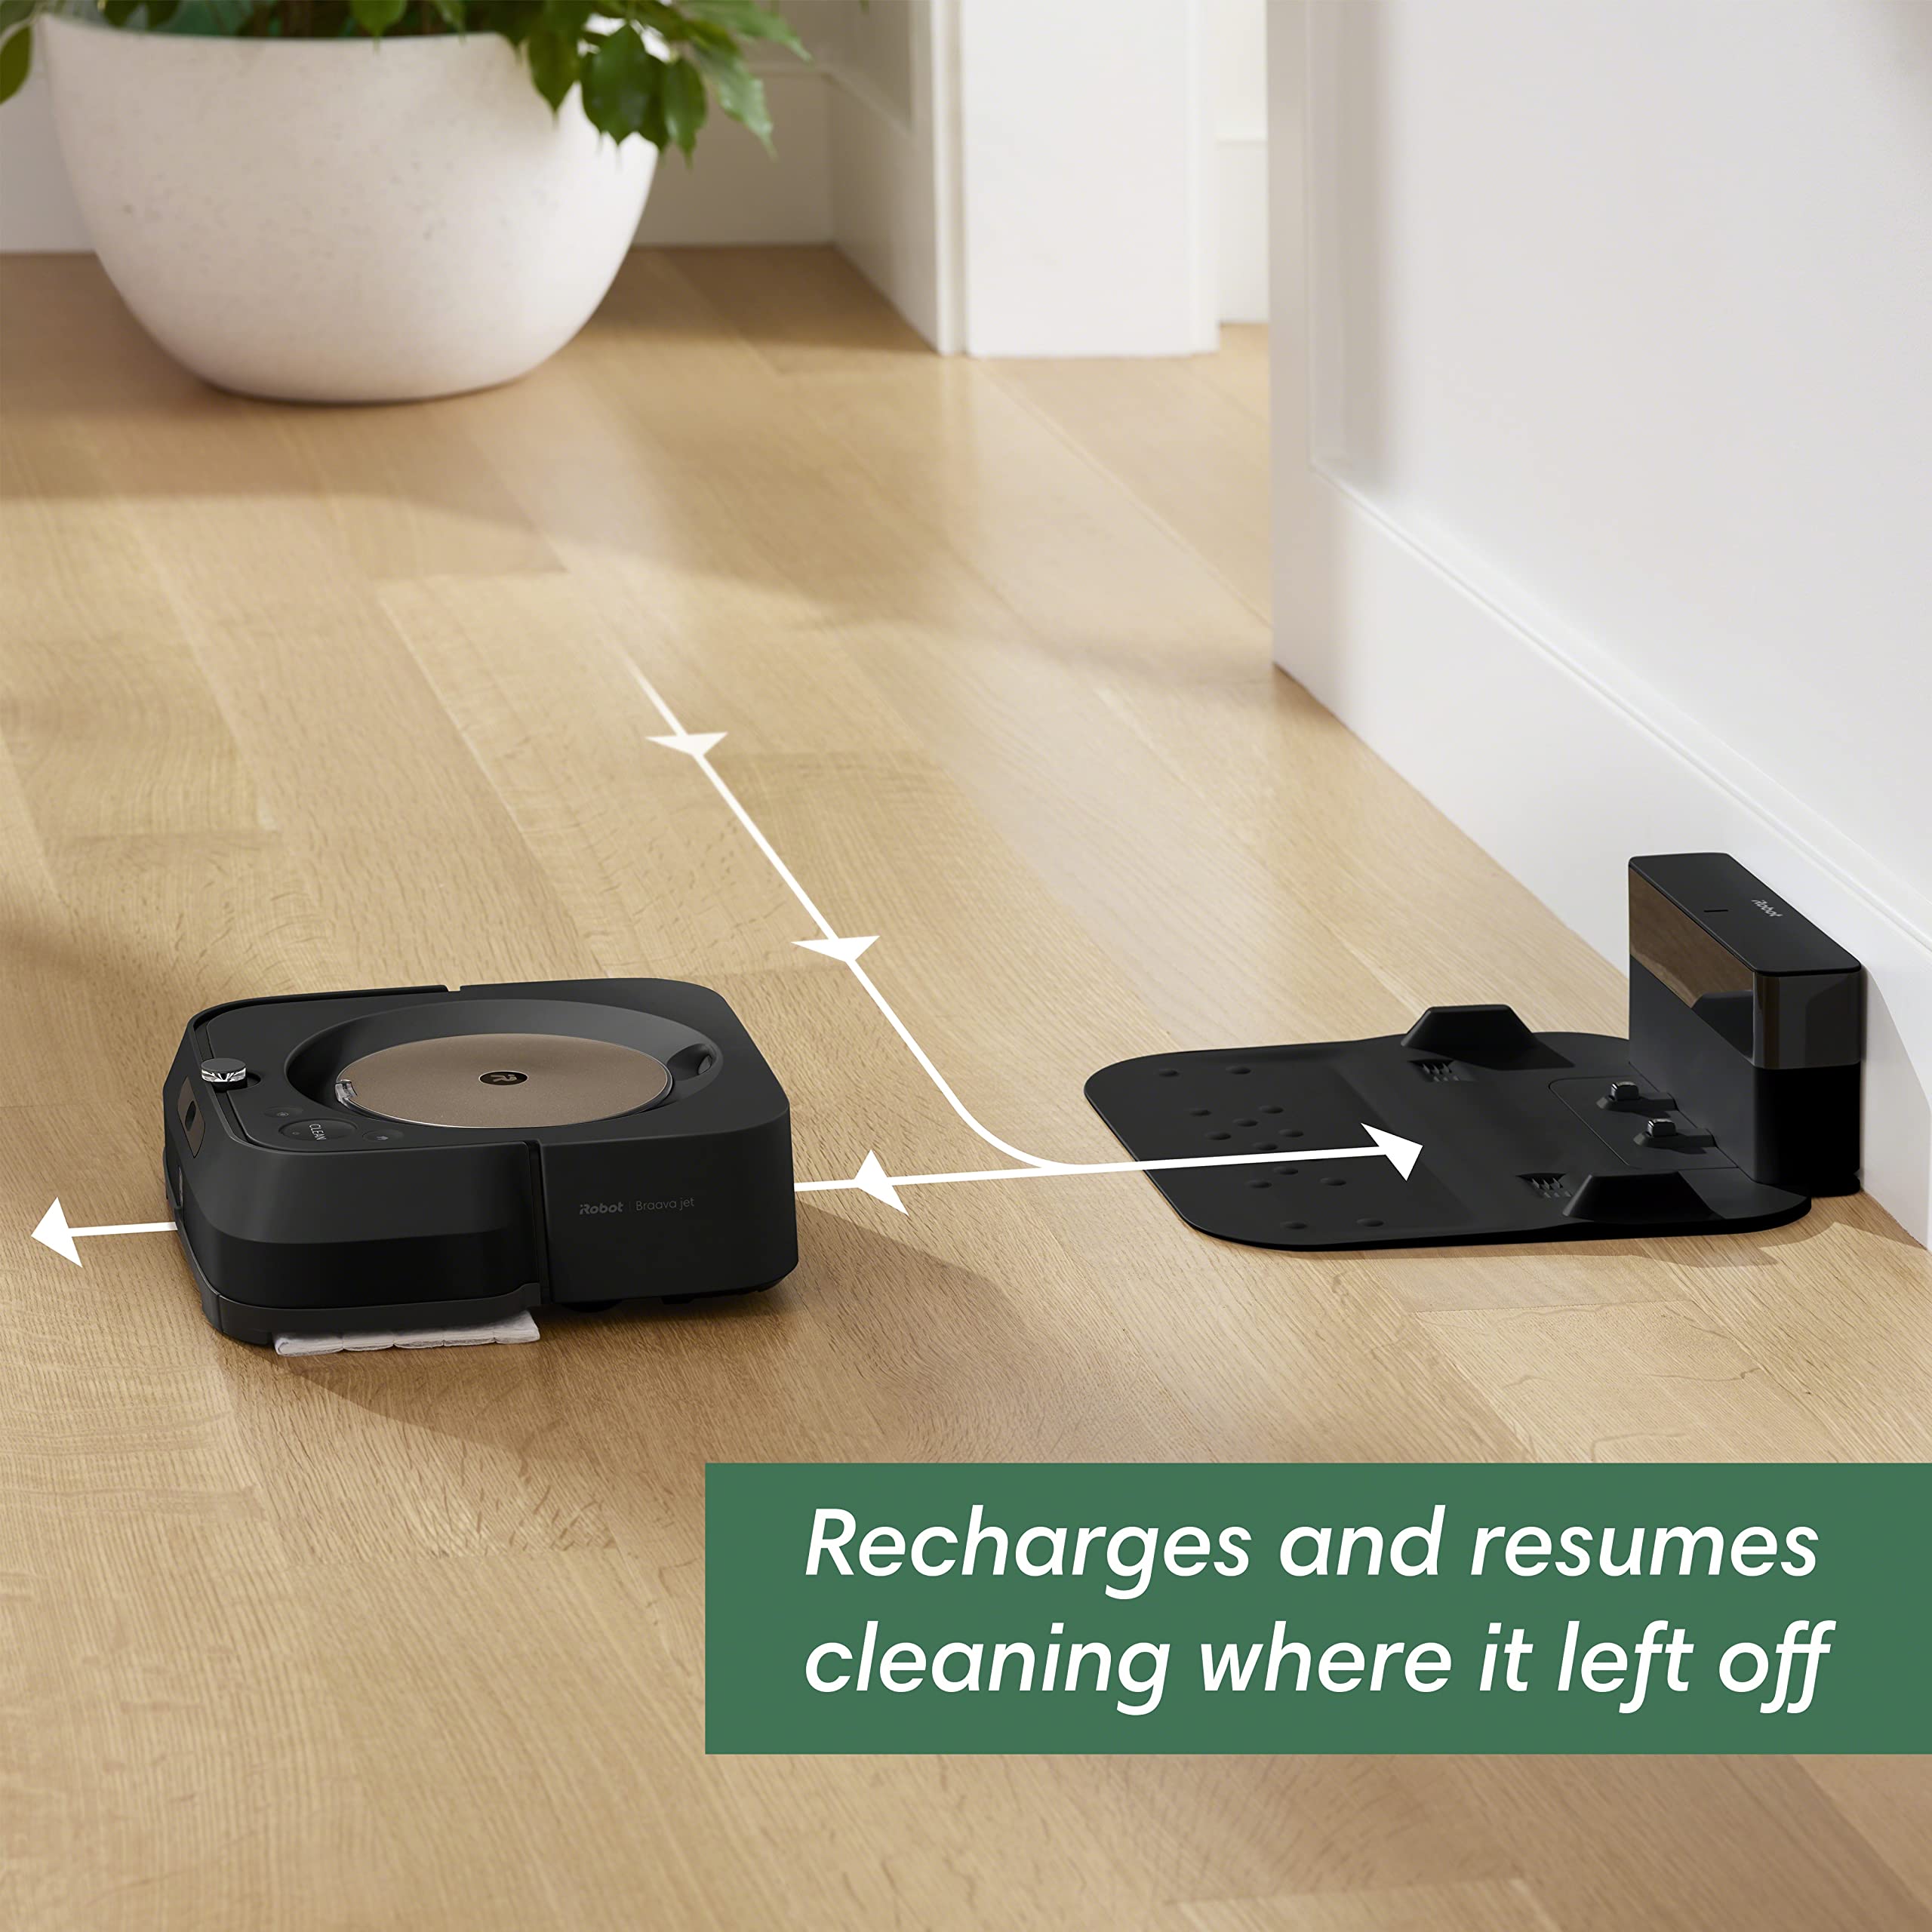 iRobot Braava Jet m6 (6012) Ultimate Robot Mop- Wi-Fi Connected, Precision Jet Spray, Smart Mapping, Works with Alexa, Ideal for Multiple Rooms, Recharges and Resumes, Black